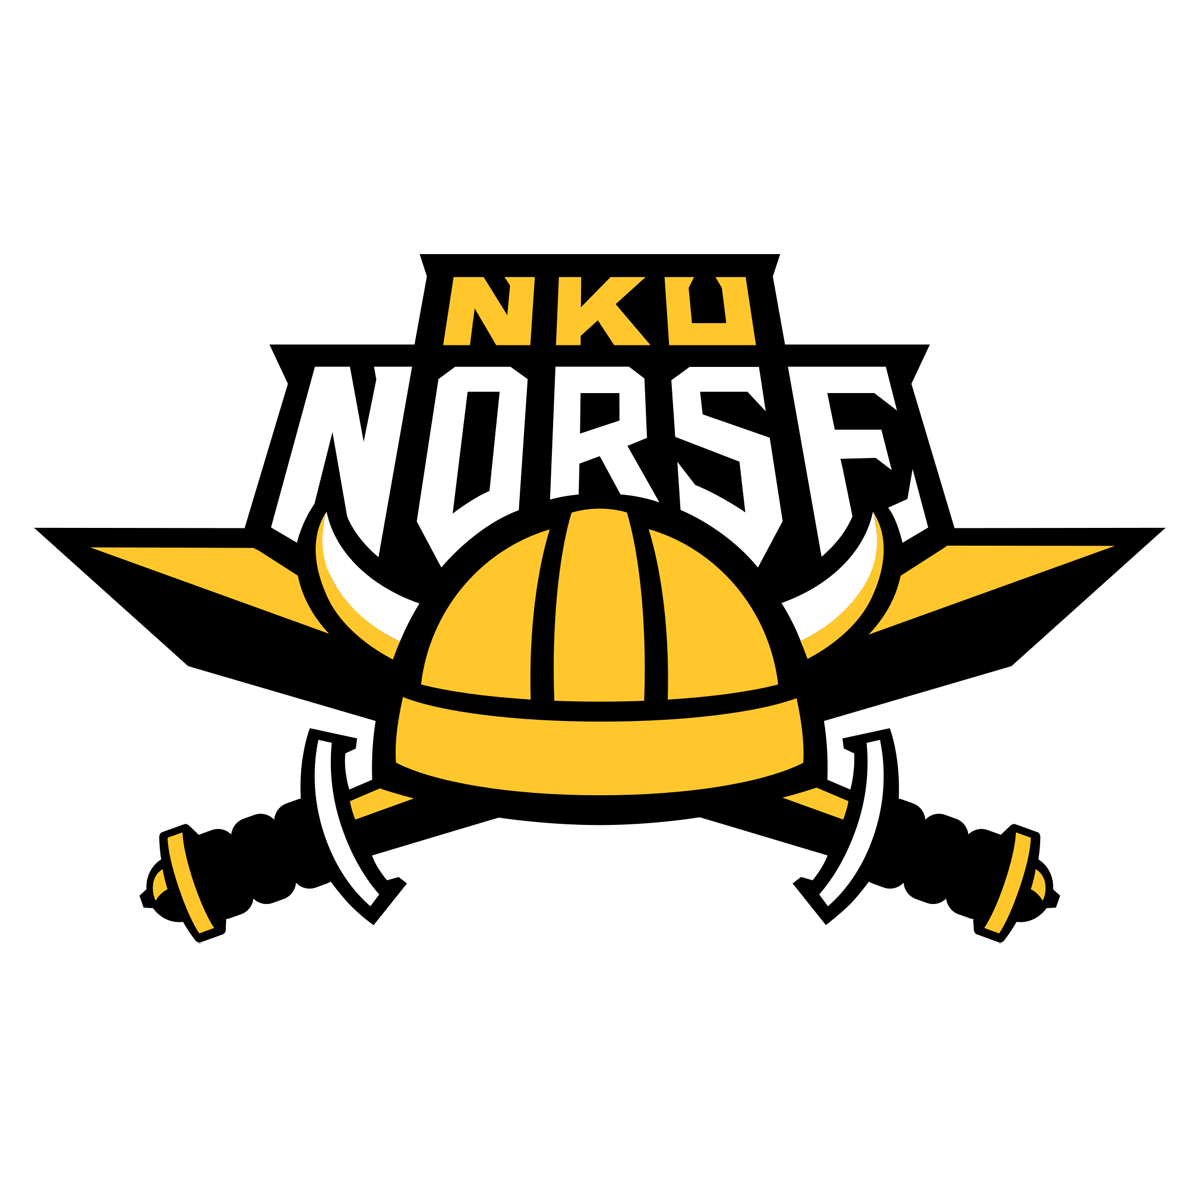 Northern Kentucky Norse logo PNG